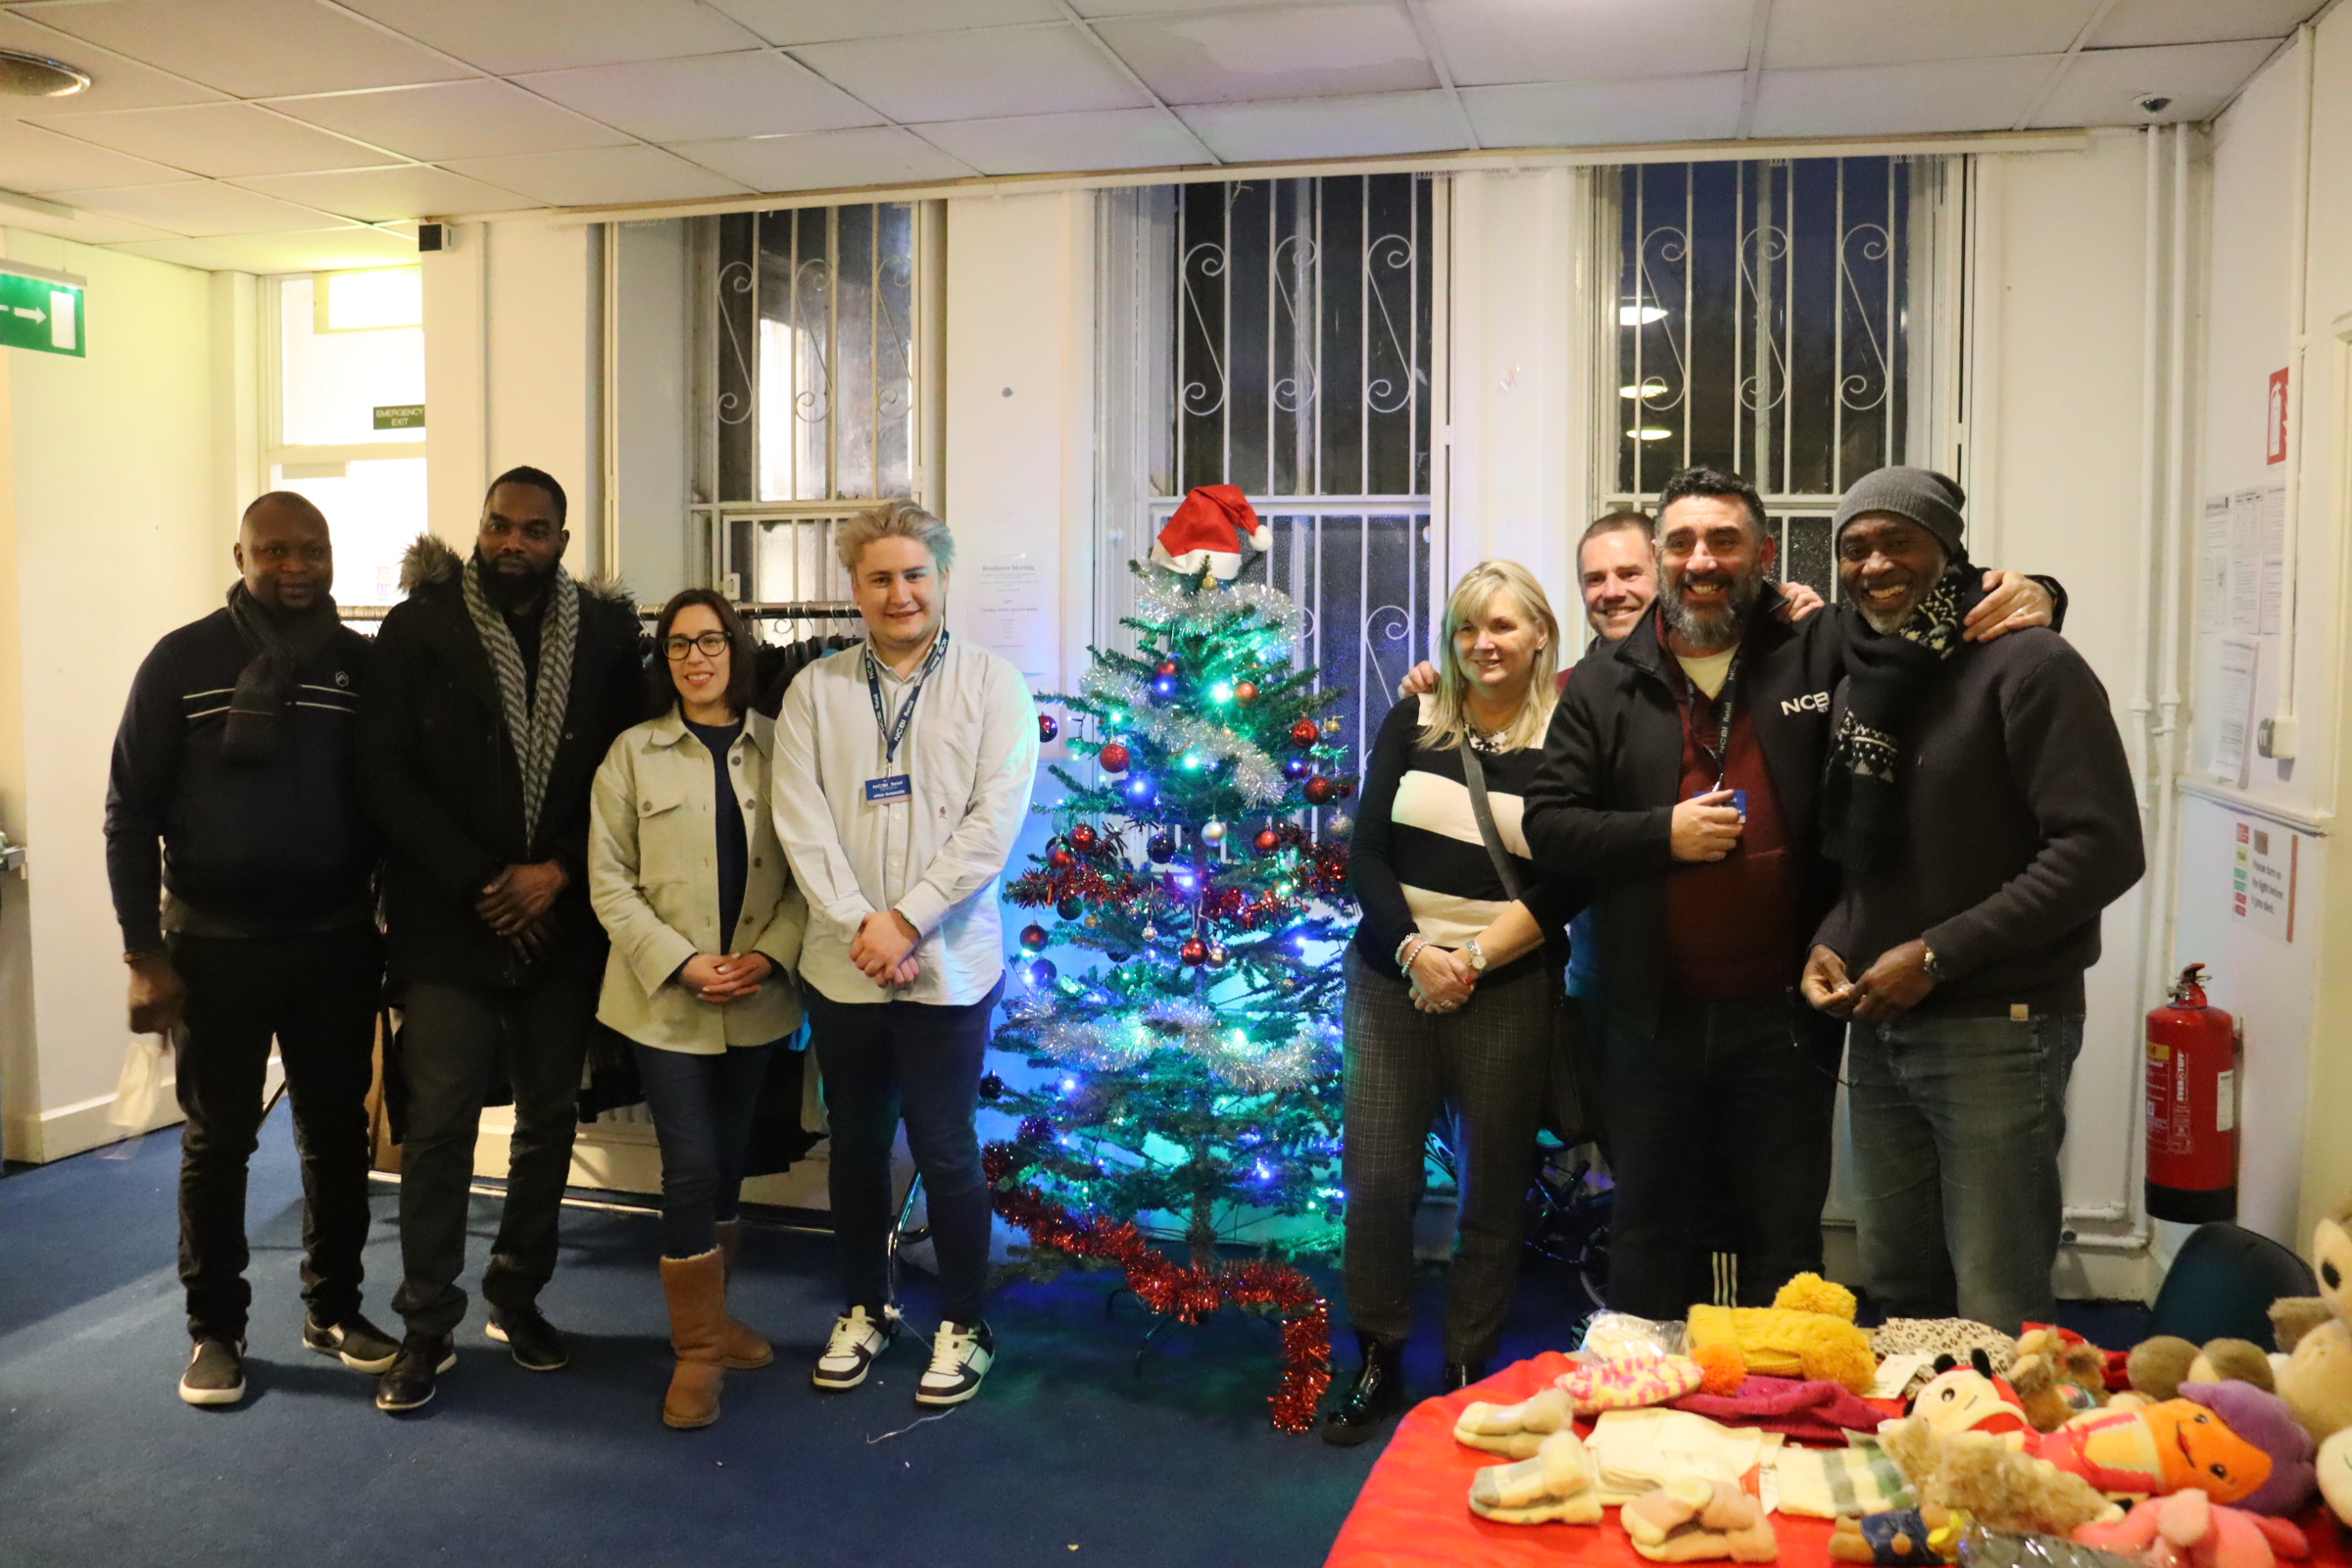 NCBI Retail staff alongside members of staff at Depaul's housing facility in north inner-city Dublin who worked together at the NCBI Retail pop-up store providing free clothing to Depaul service users on Wednesday 14th December. The group are all standing beside a Christmas tree and a clothing rail.